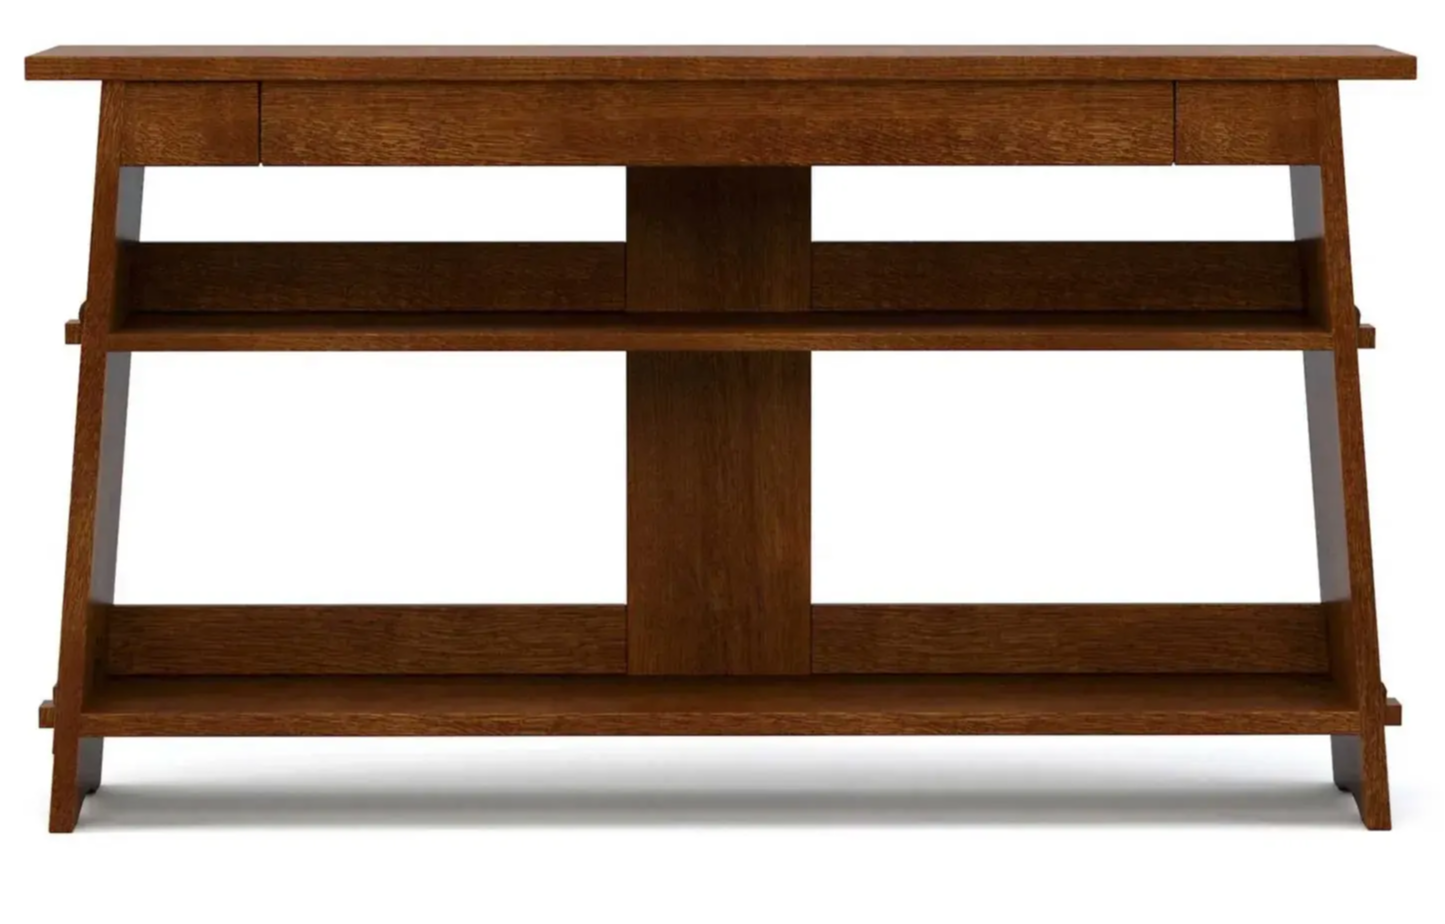 Stickley's Collector's Edition Craftsman Console